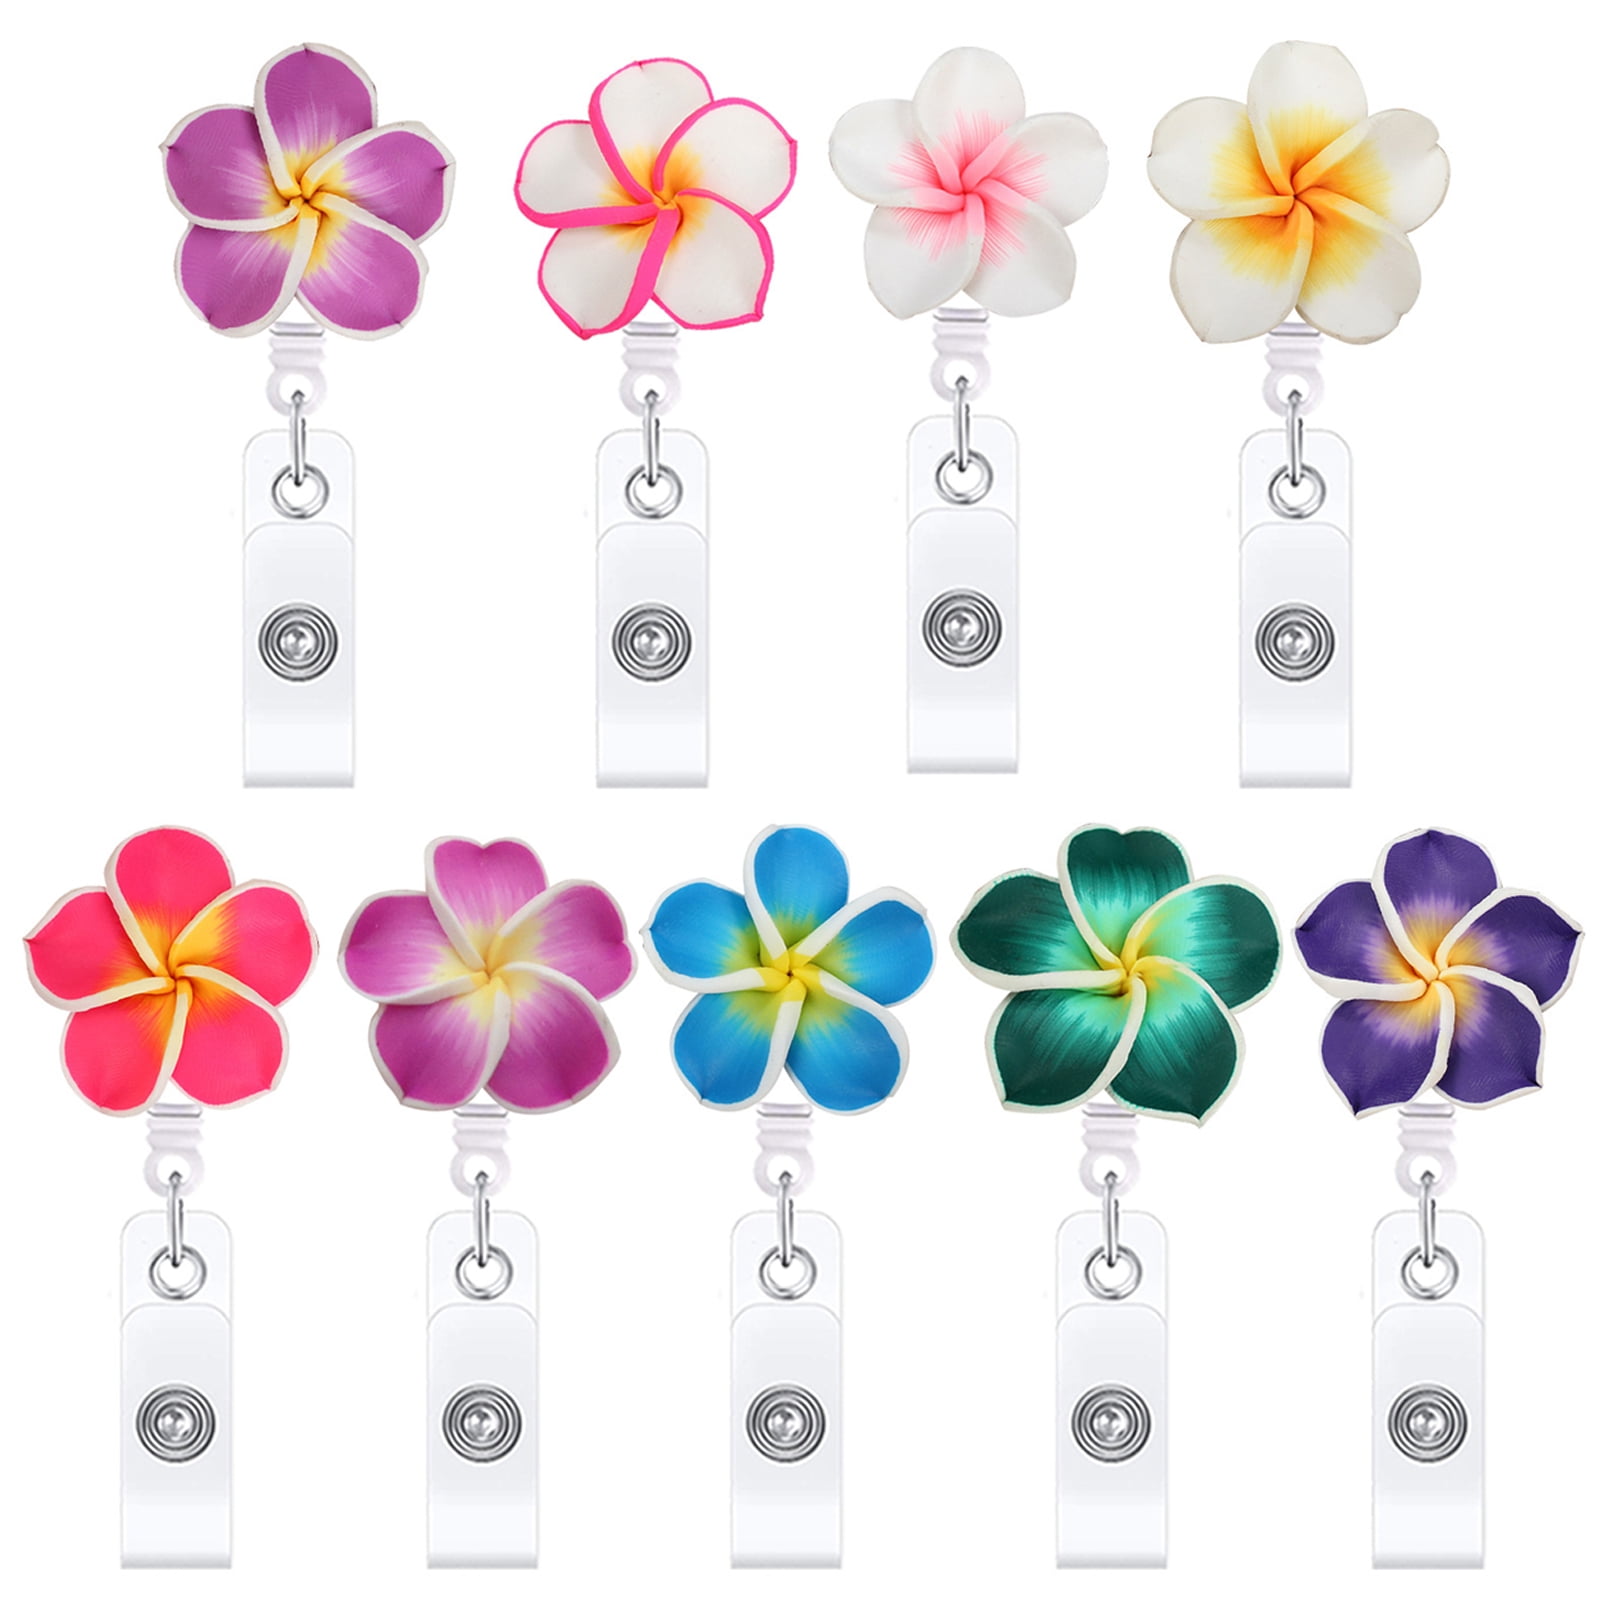 Infinity Collection It's a Beautiful Day to Save Lives - Nurse Badge Reel - Retractable  ID Badge Holder - Nurse Badge - Badge Clip - Badge Reels - Pediatric - RN -  Name Badge Holder 